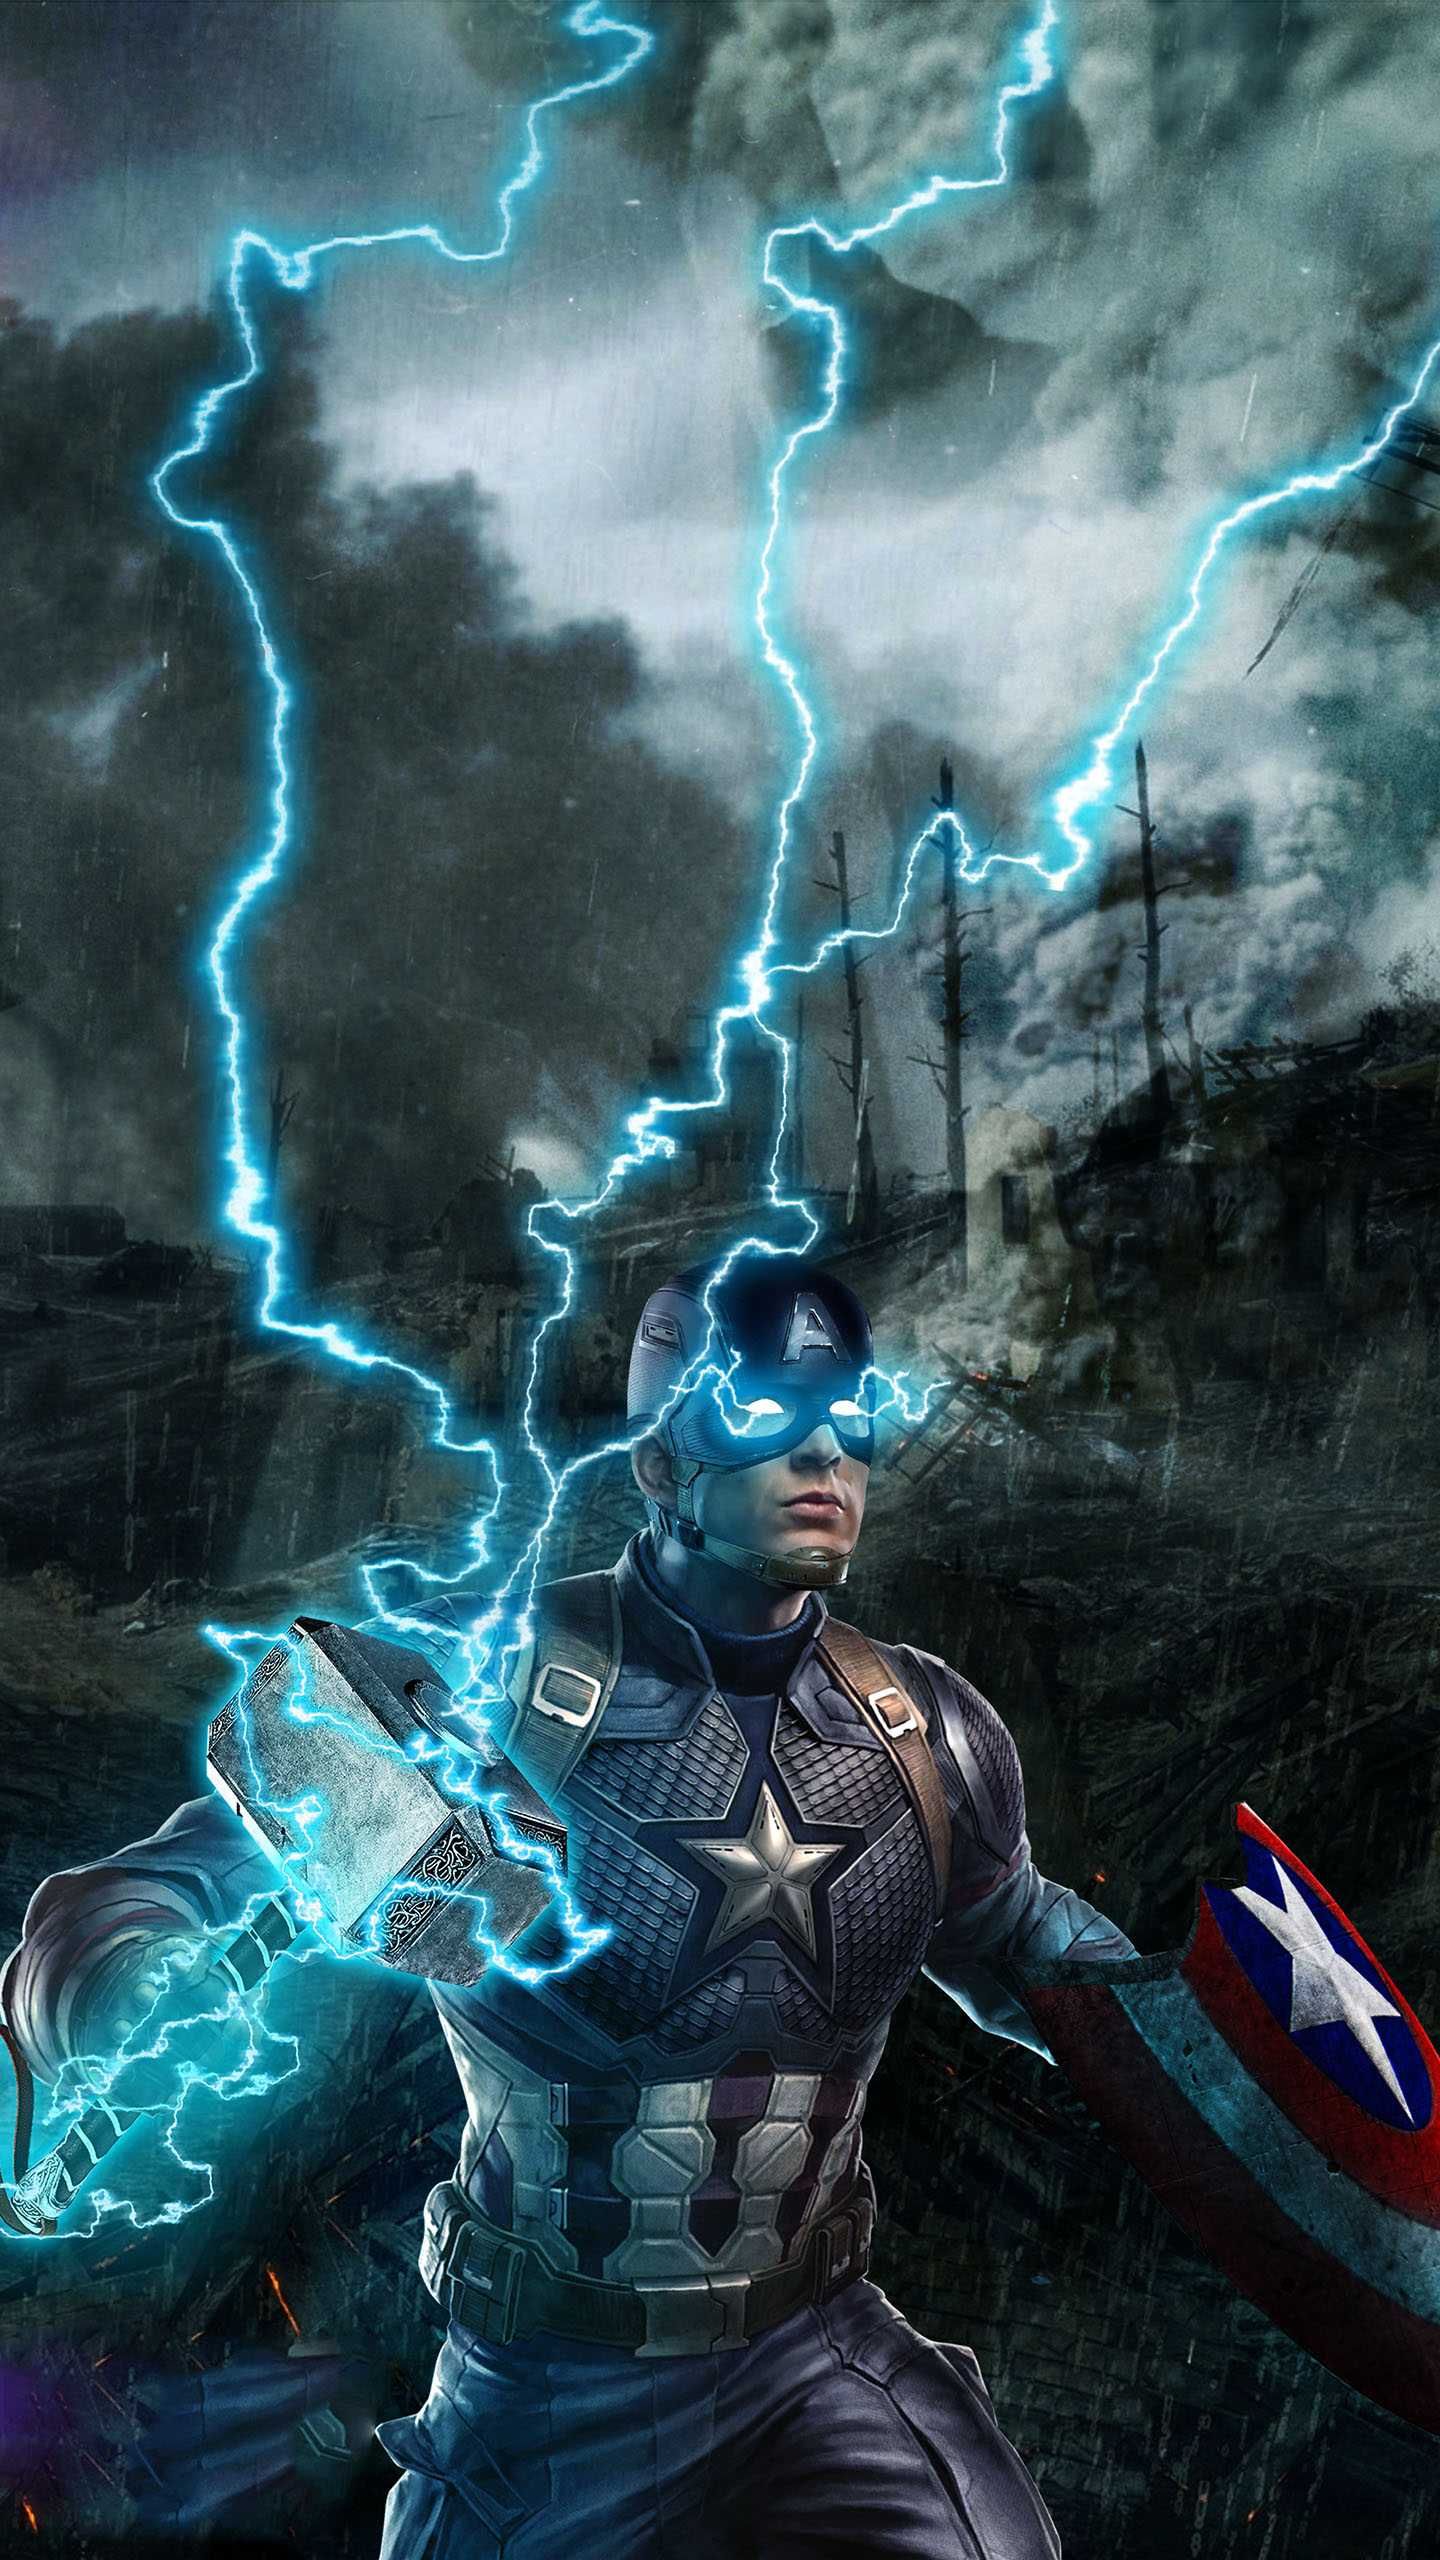 Captain America With Thor Hammer IPhone Wallpaper. Captain america wallpaper, Marvel captain america, Avengers wallpaper